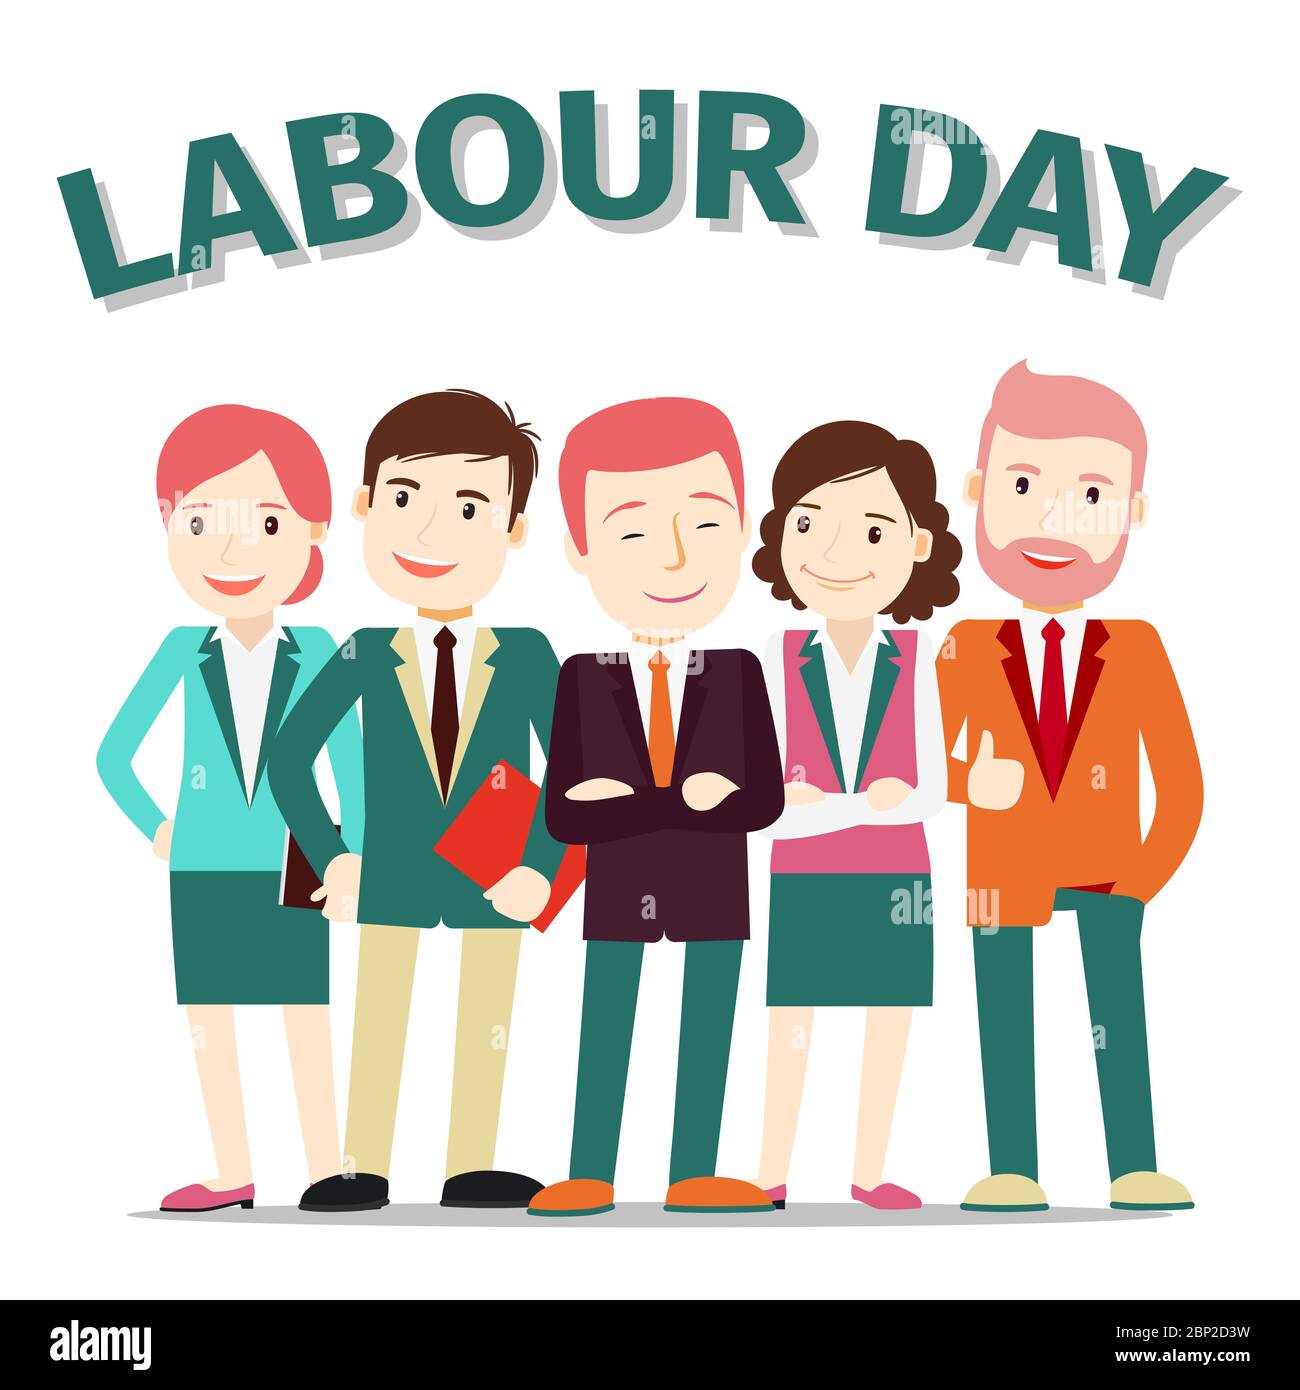 Business team, vector illustration. Labour Day poster with businessmen and women on white background Stock Vector